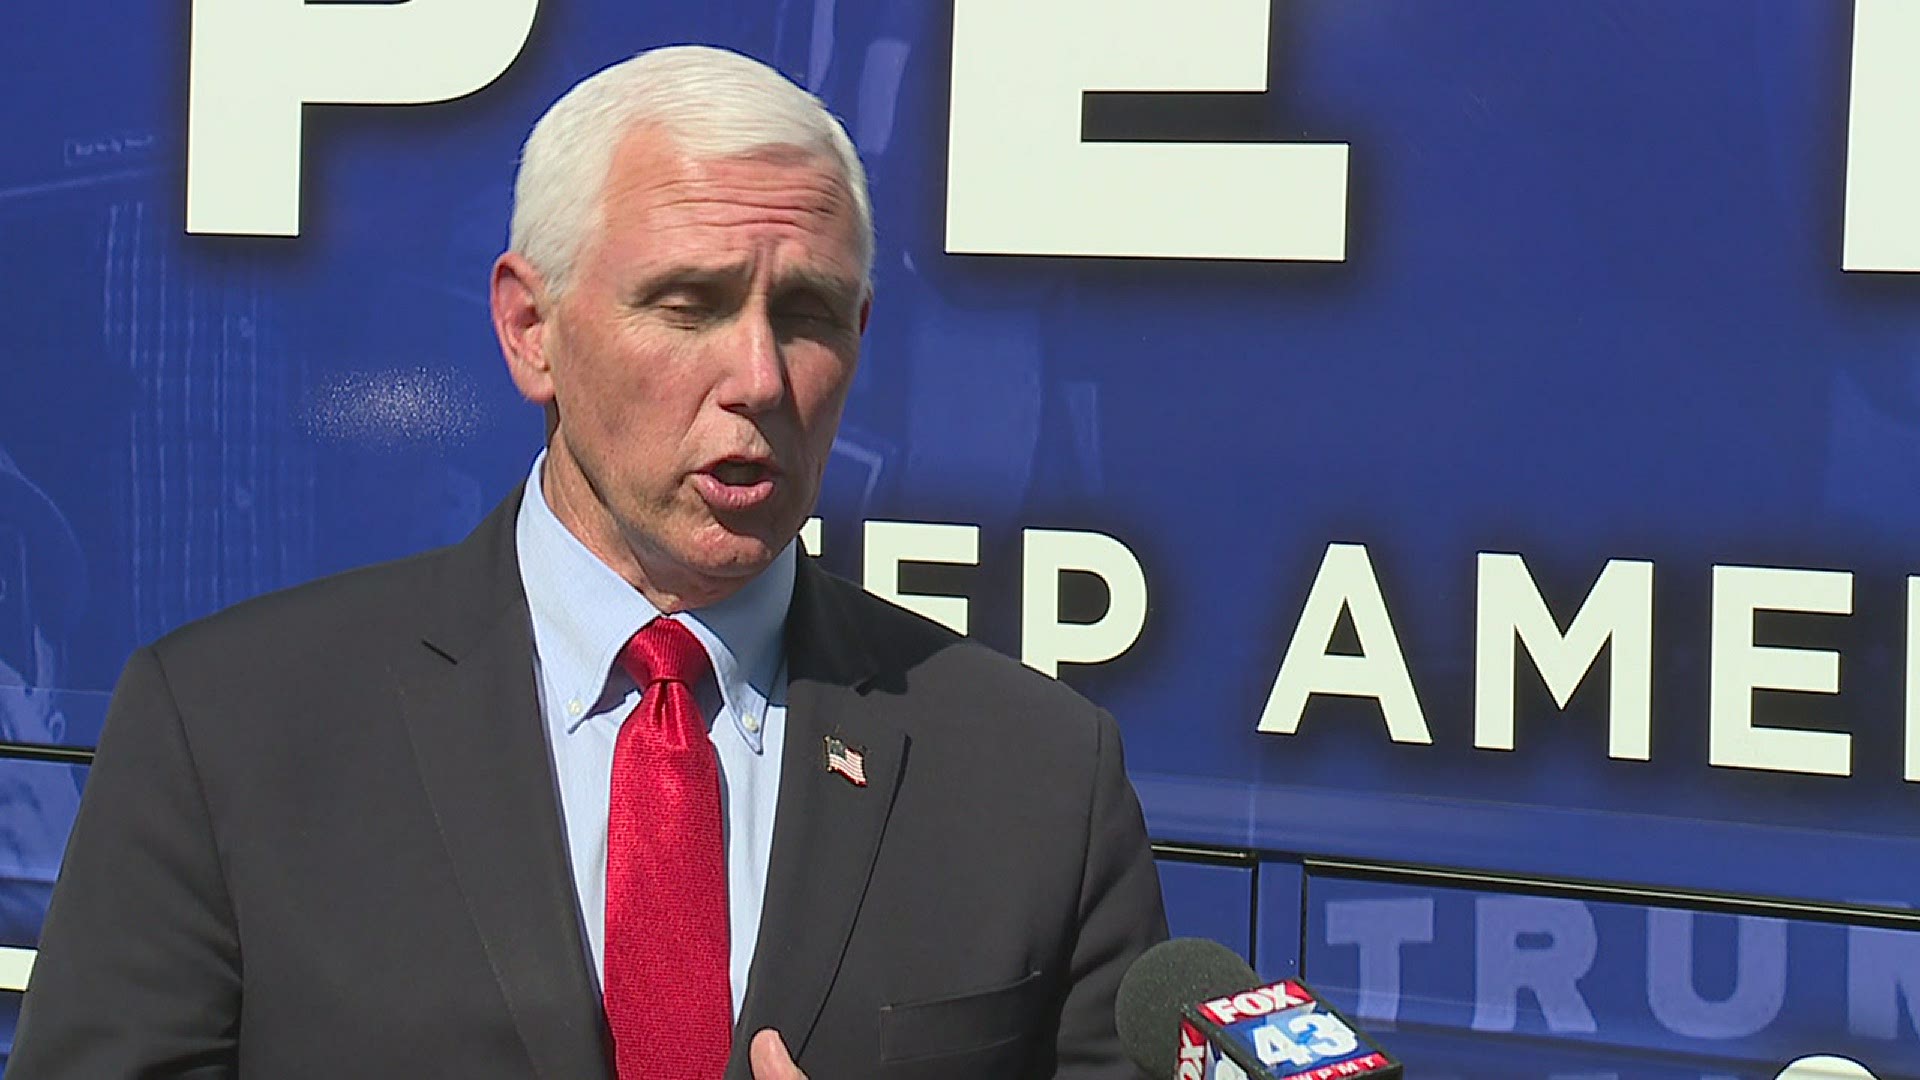 FOX43 got to speak one-on-one with Vice President Mike Pence.